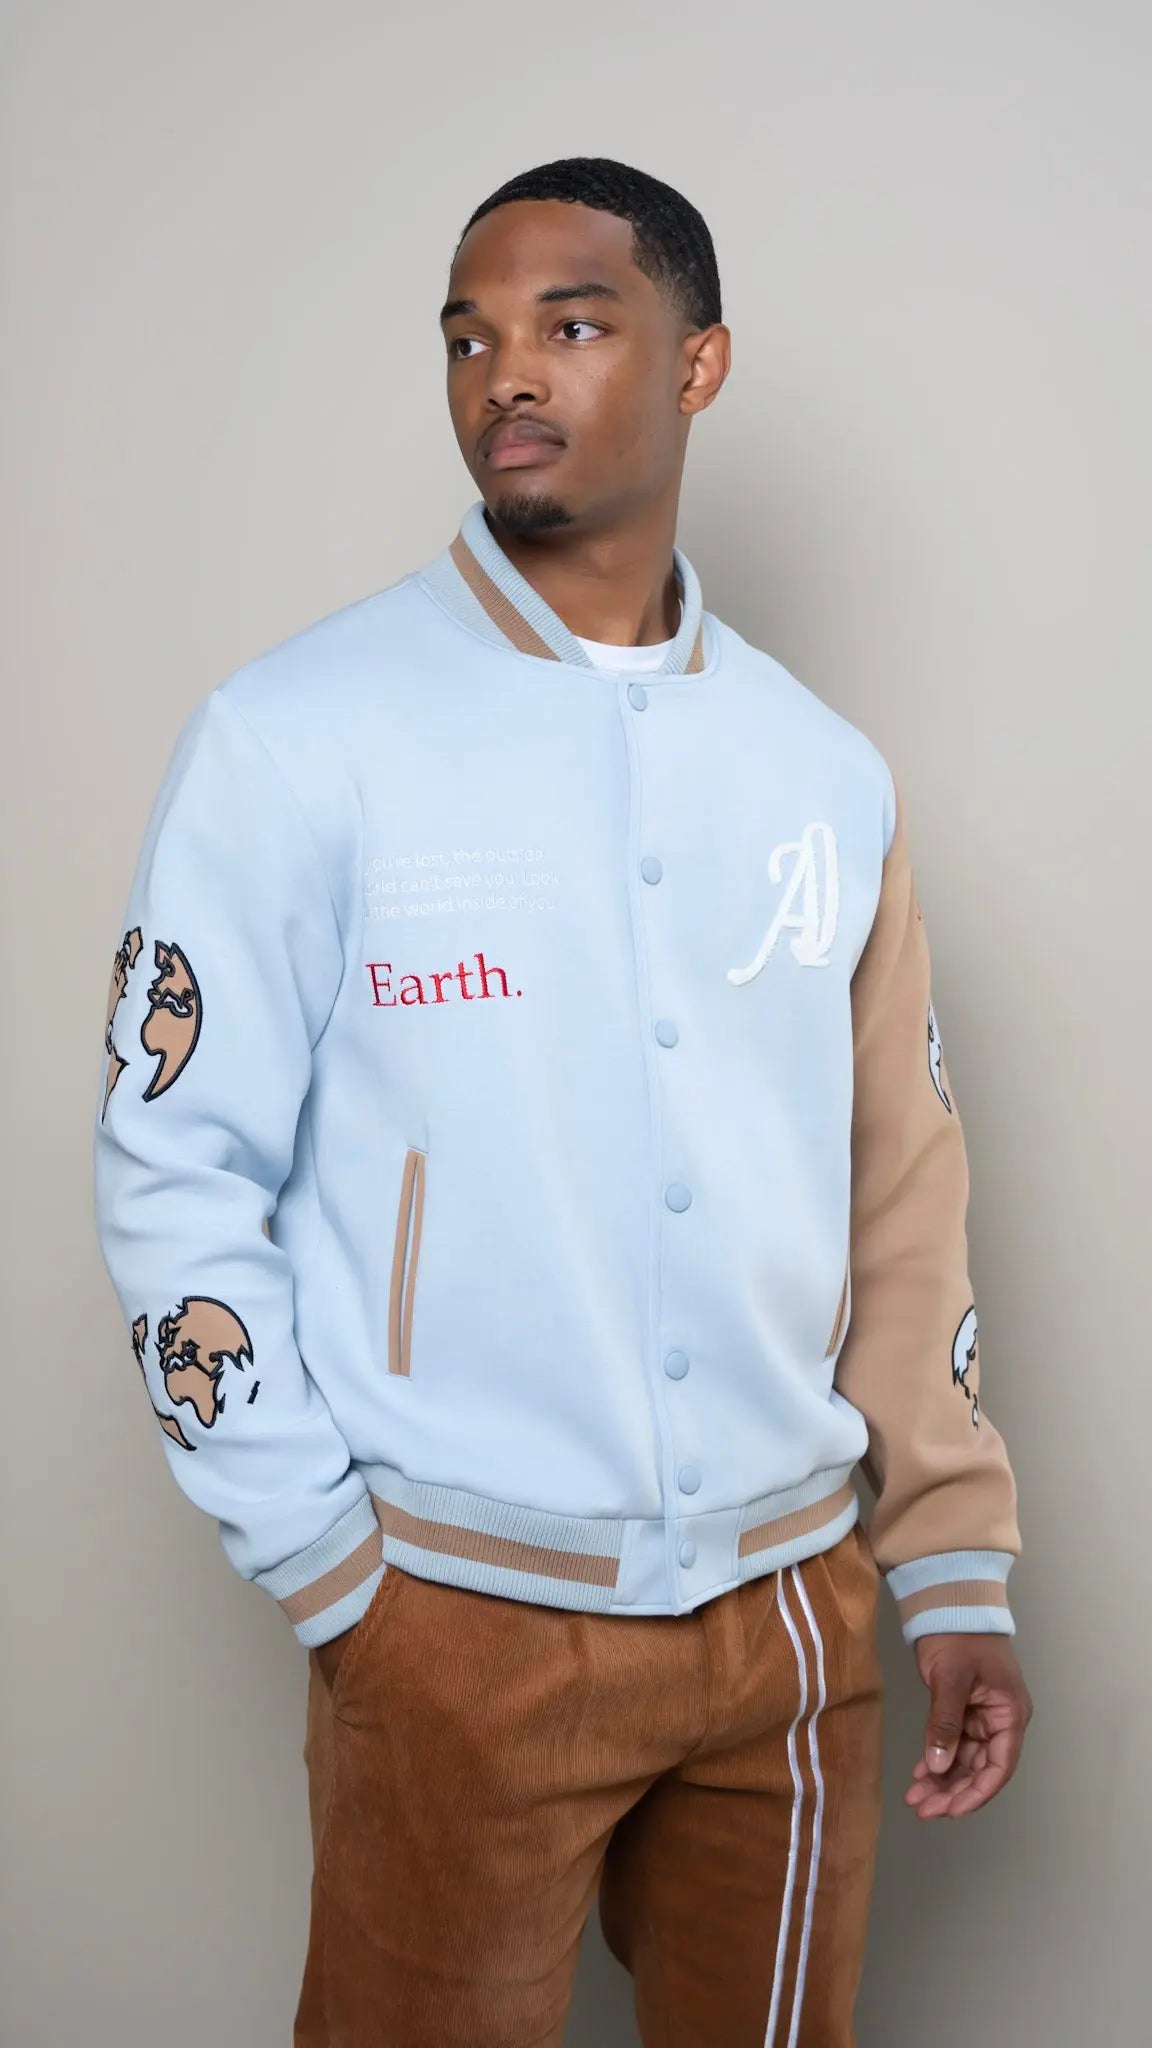 Photo of model in the Arius Juan Sky Blue Worldly Letterman Jacket posing for product picture.